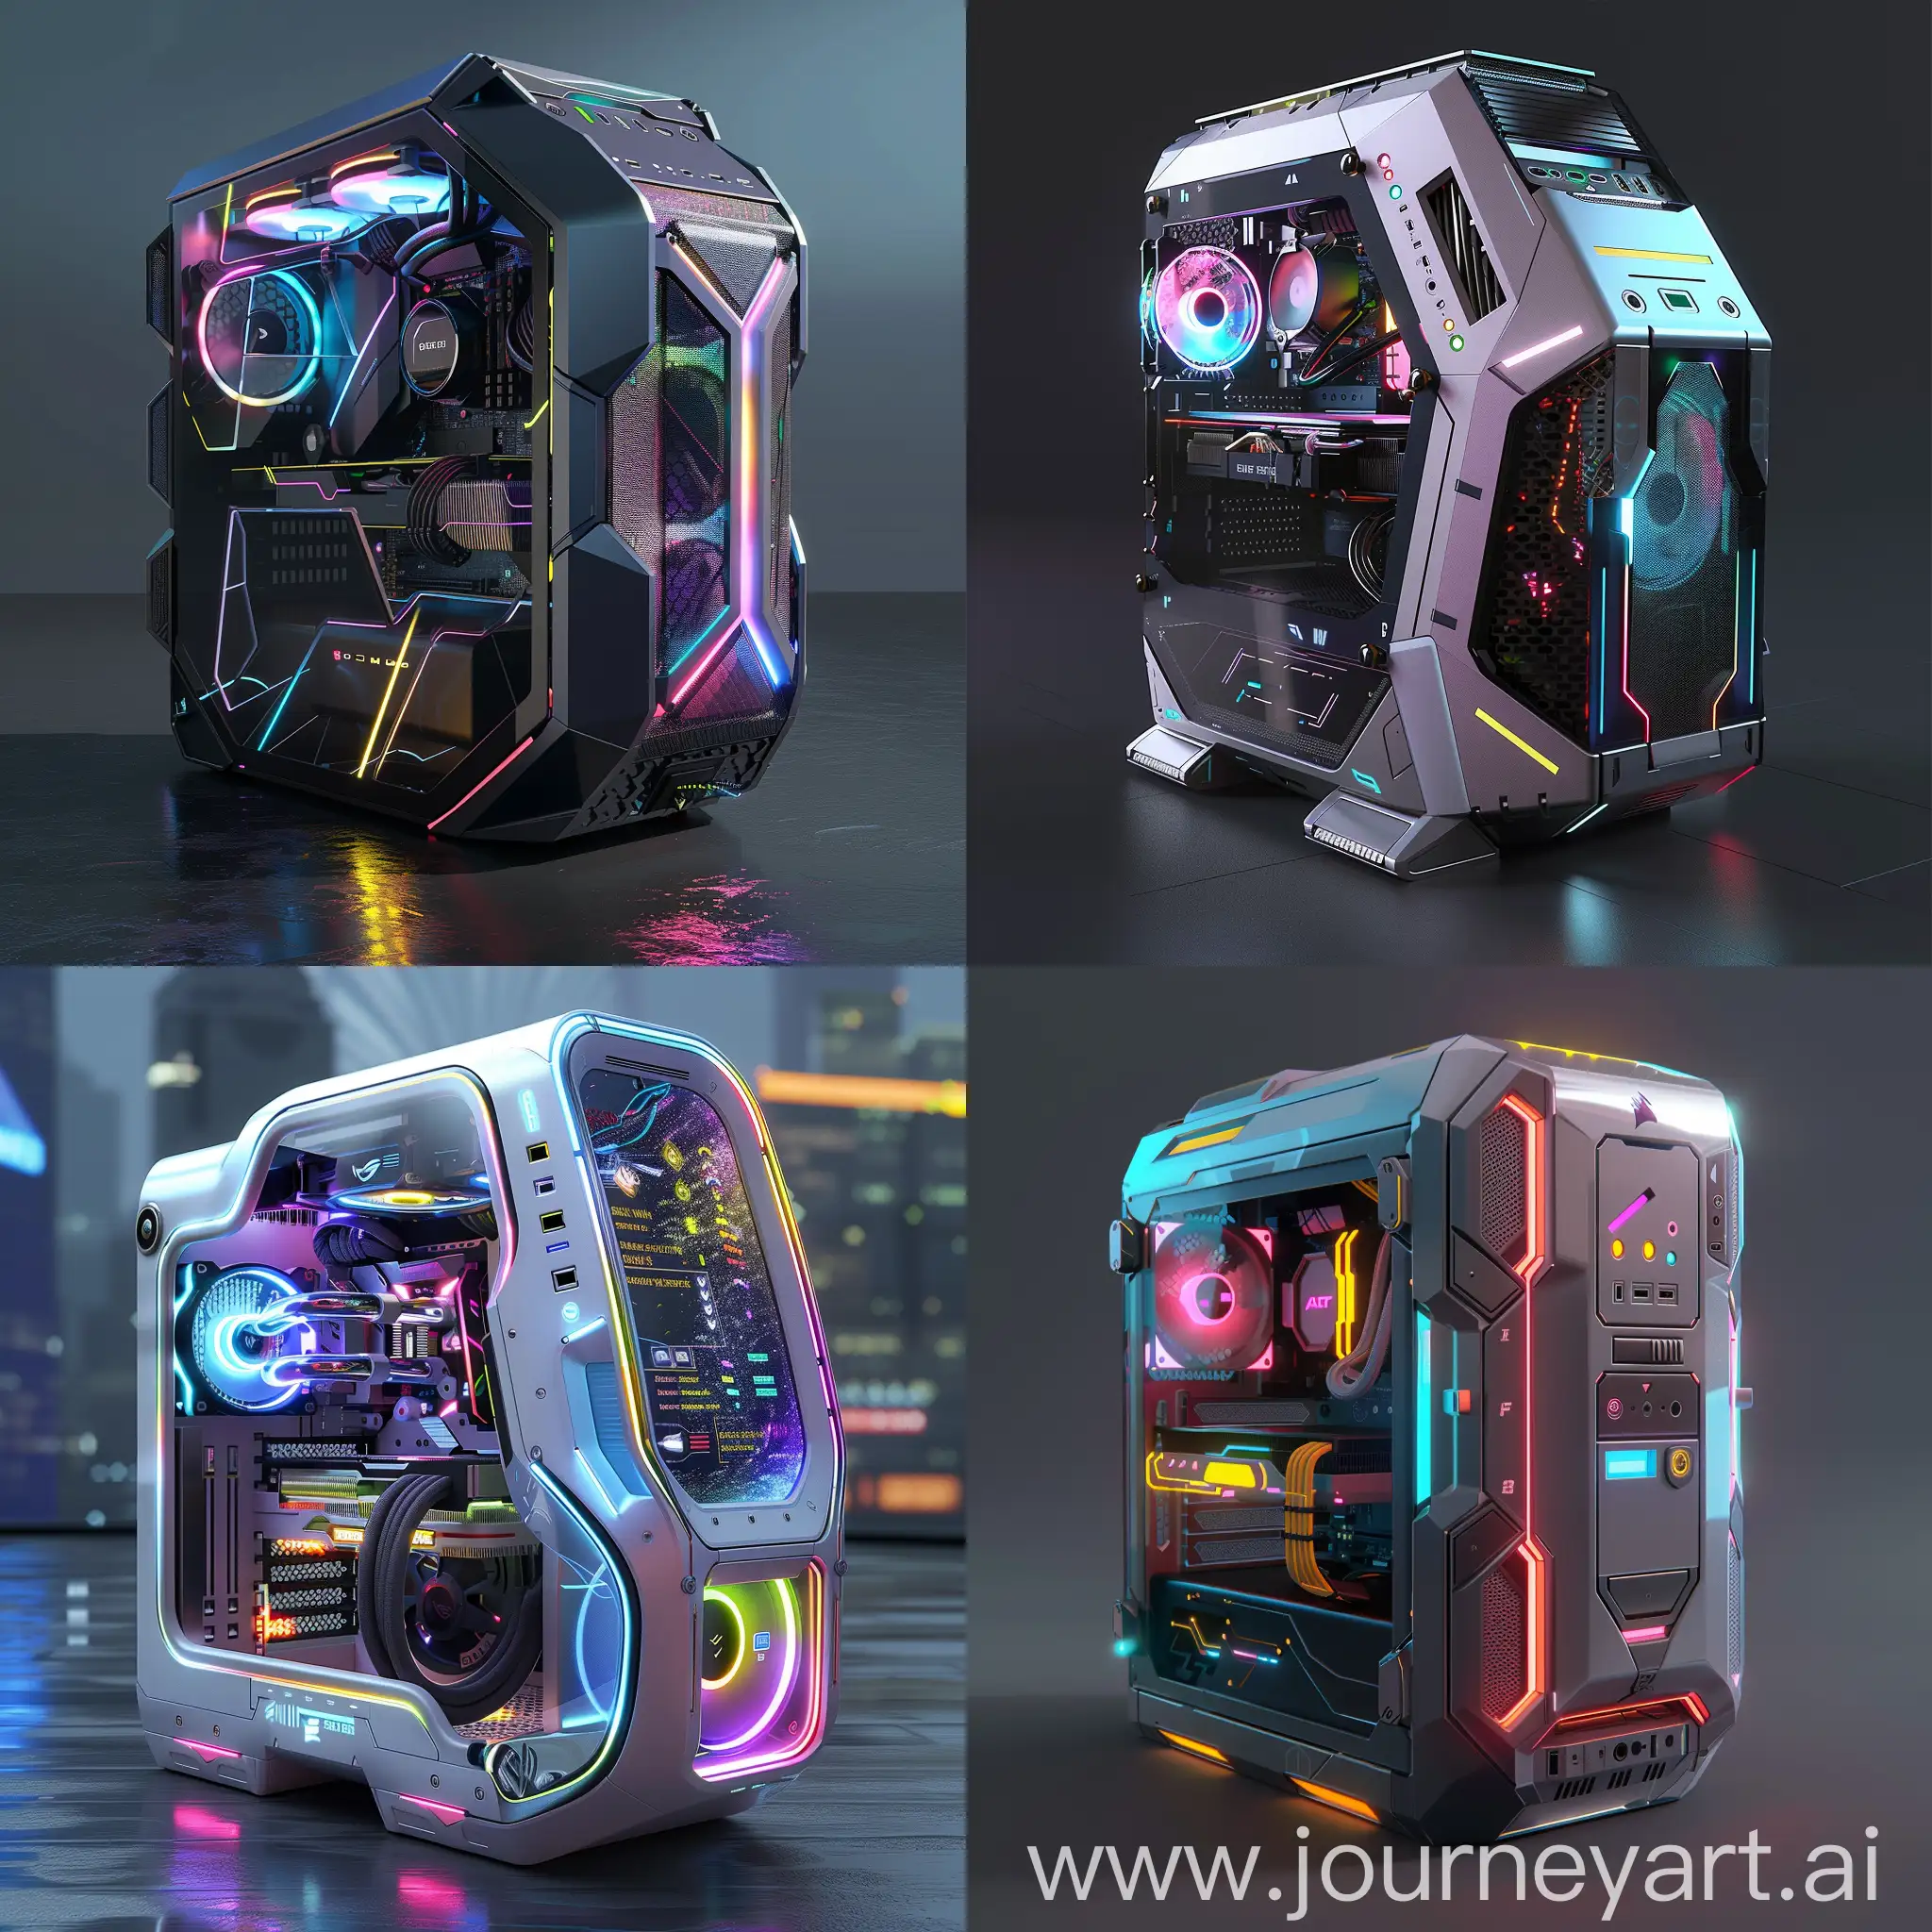 Futuristic-PC-Case-with-Modular-Design-and-Advanced-Features